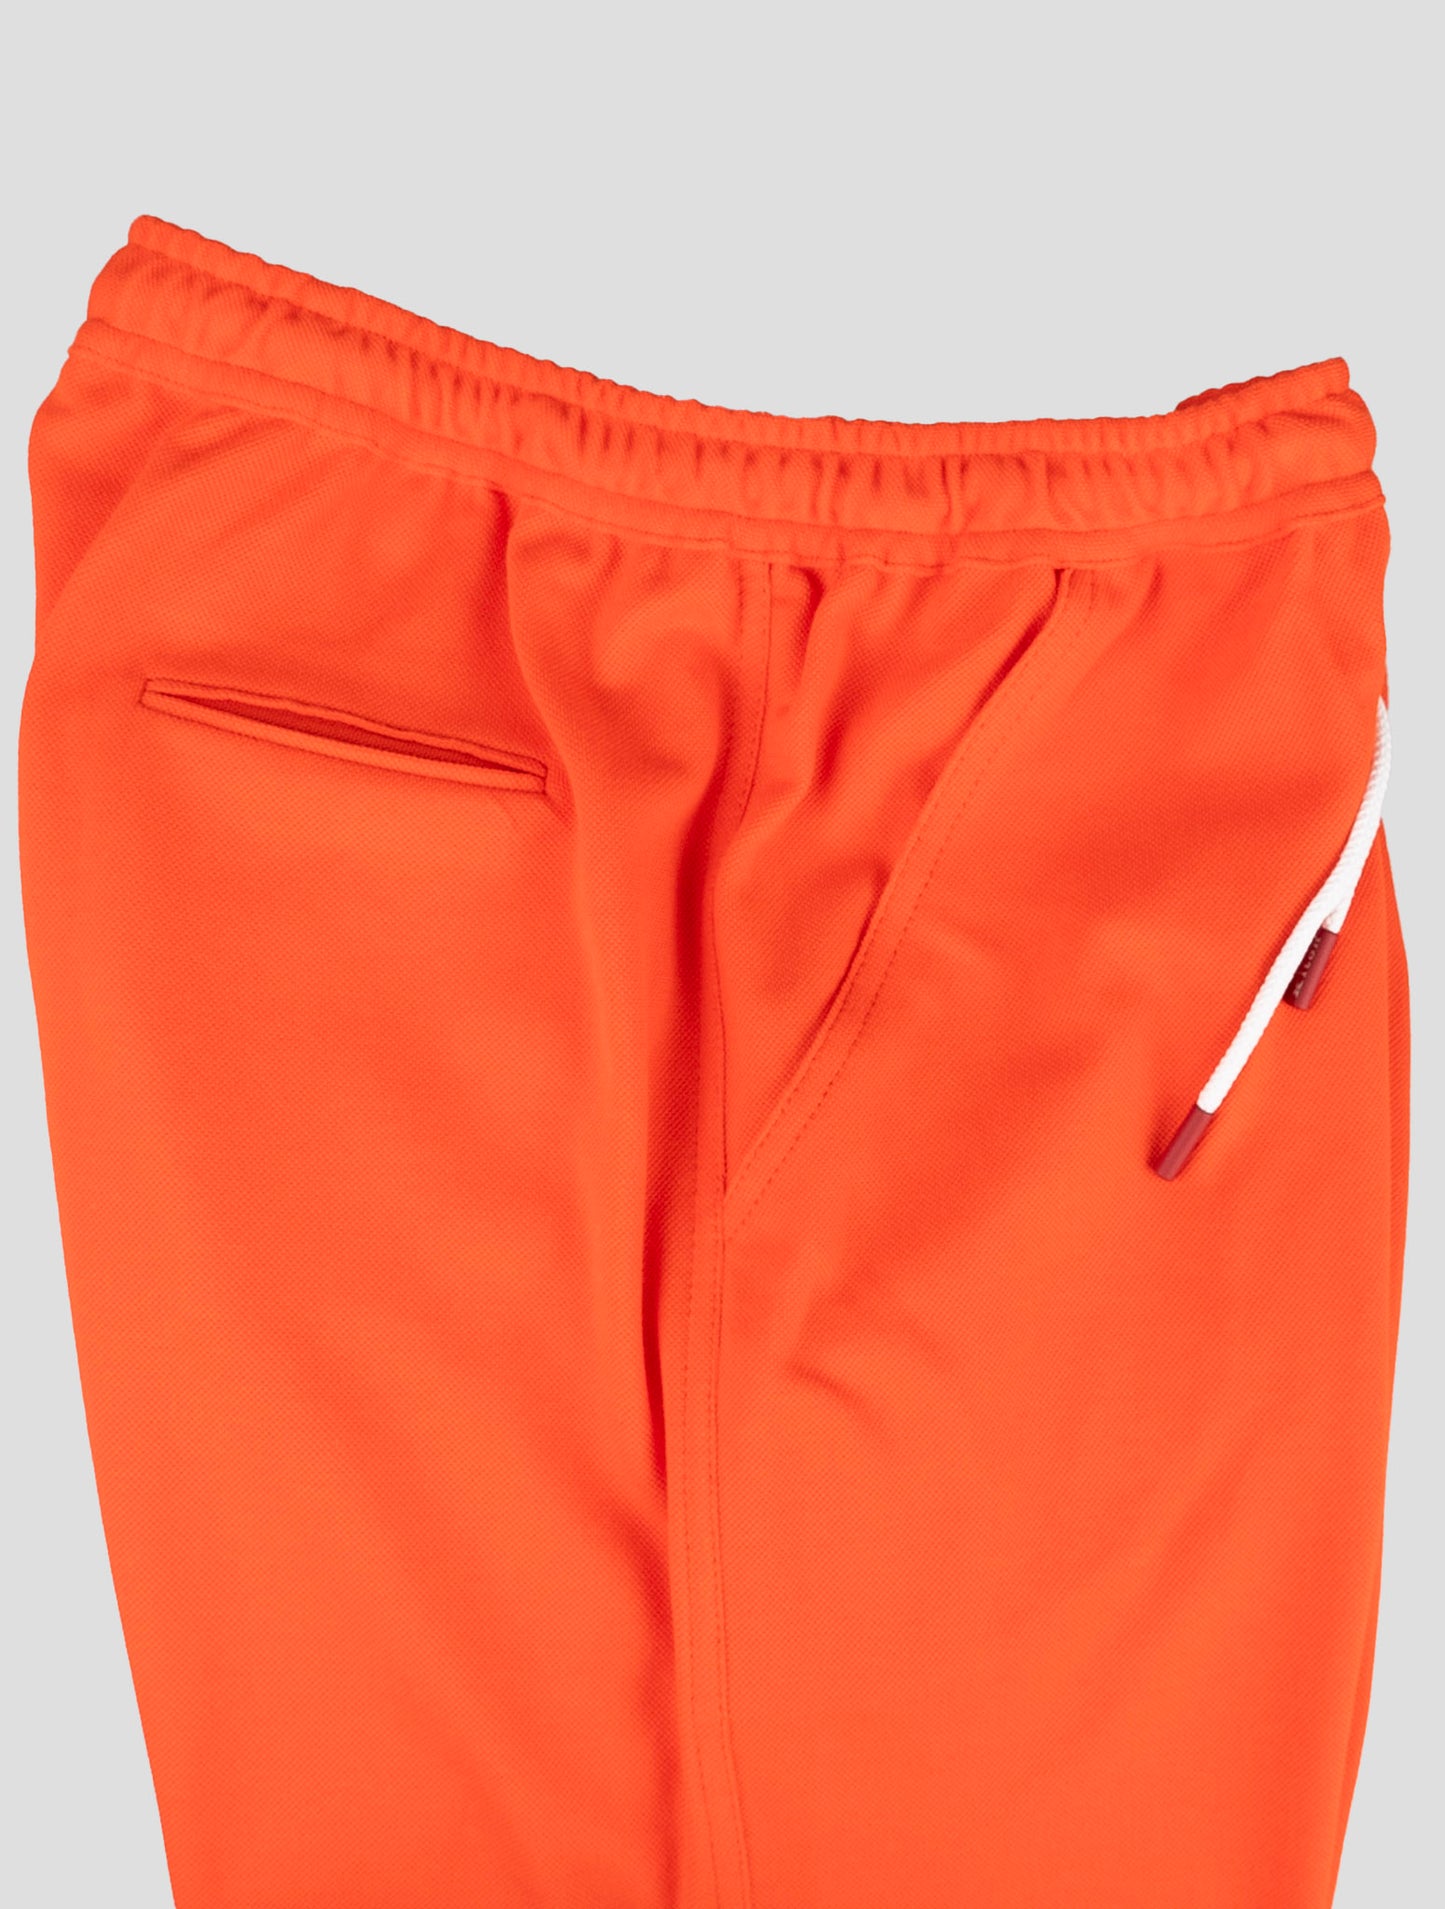 Kiton Matching Outfit - Blue Mariano and Orange Short Pants Tracksuit